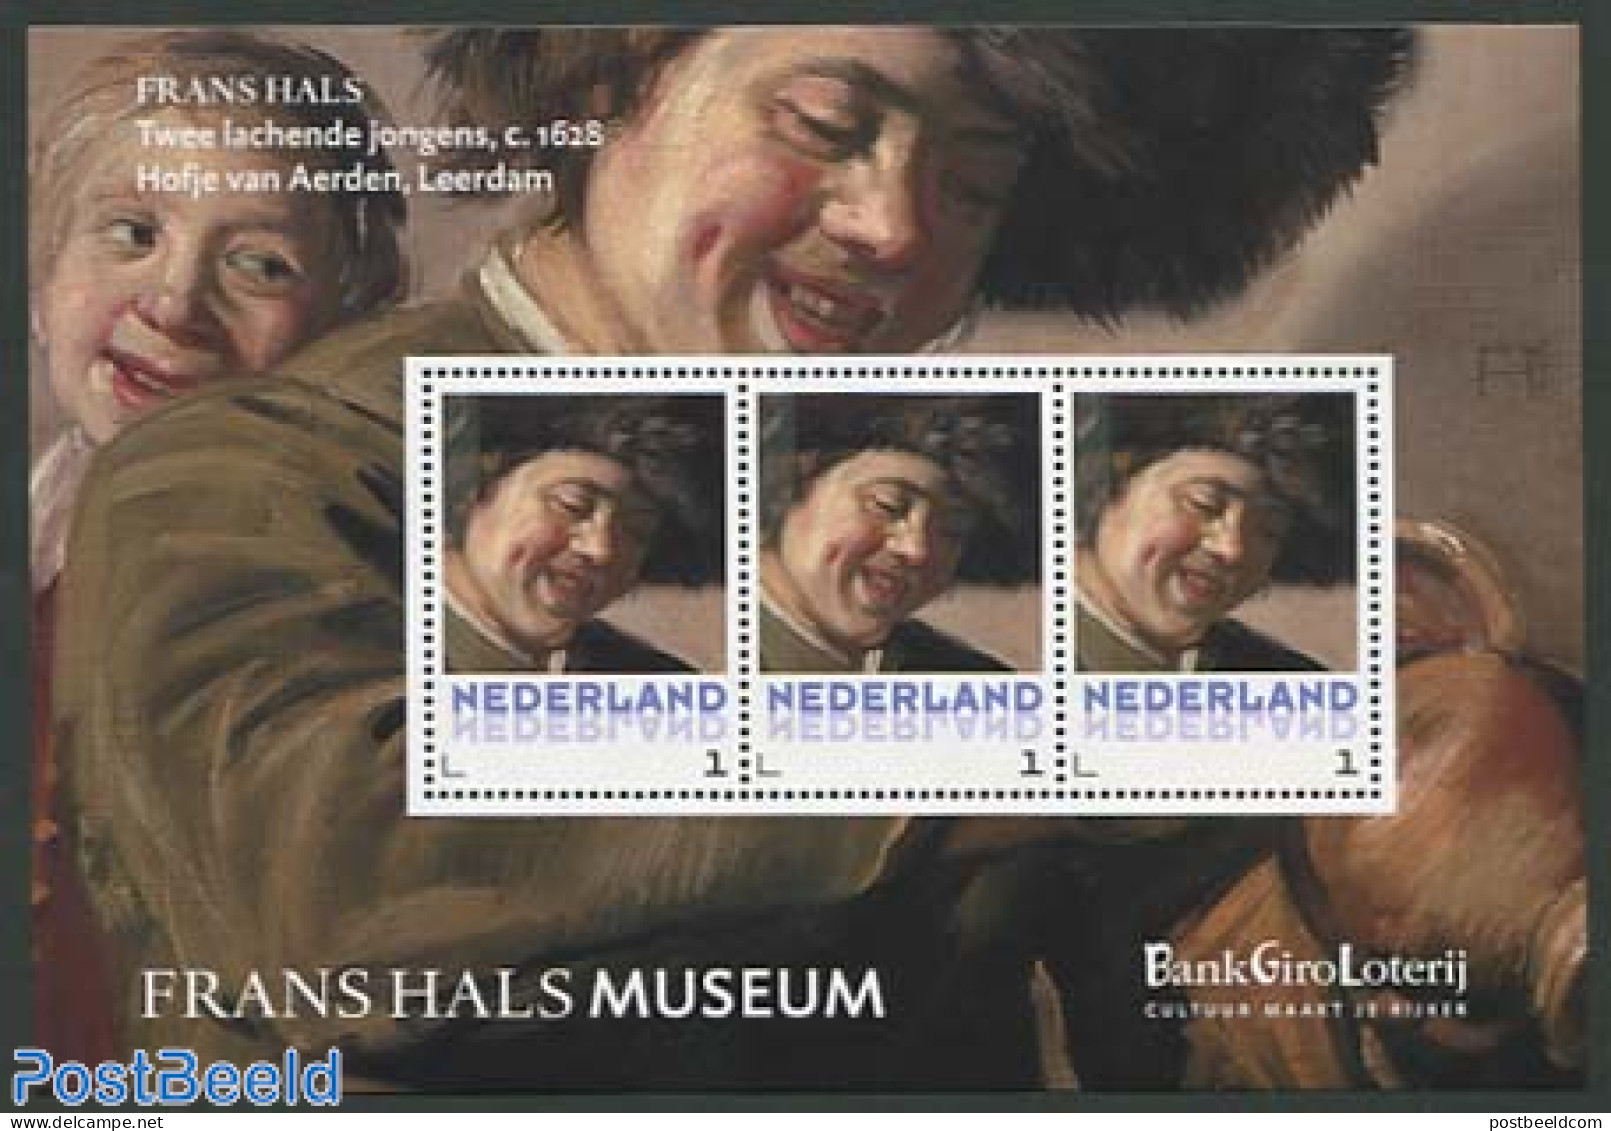 Netherlands - Personal Stamps TNT/PNL 2013 Frans Hals Museum 3v M/s, Mint NH, Art - Museums - Paintings - Museen